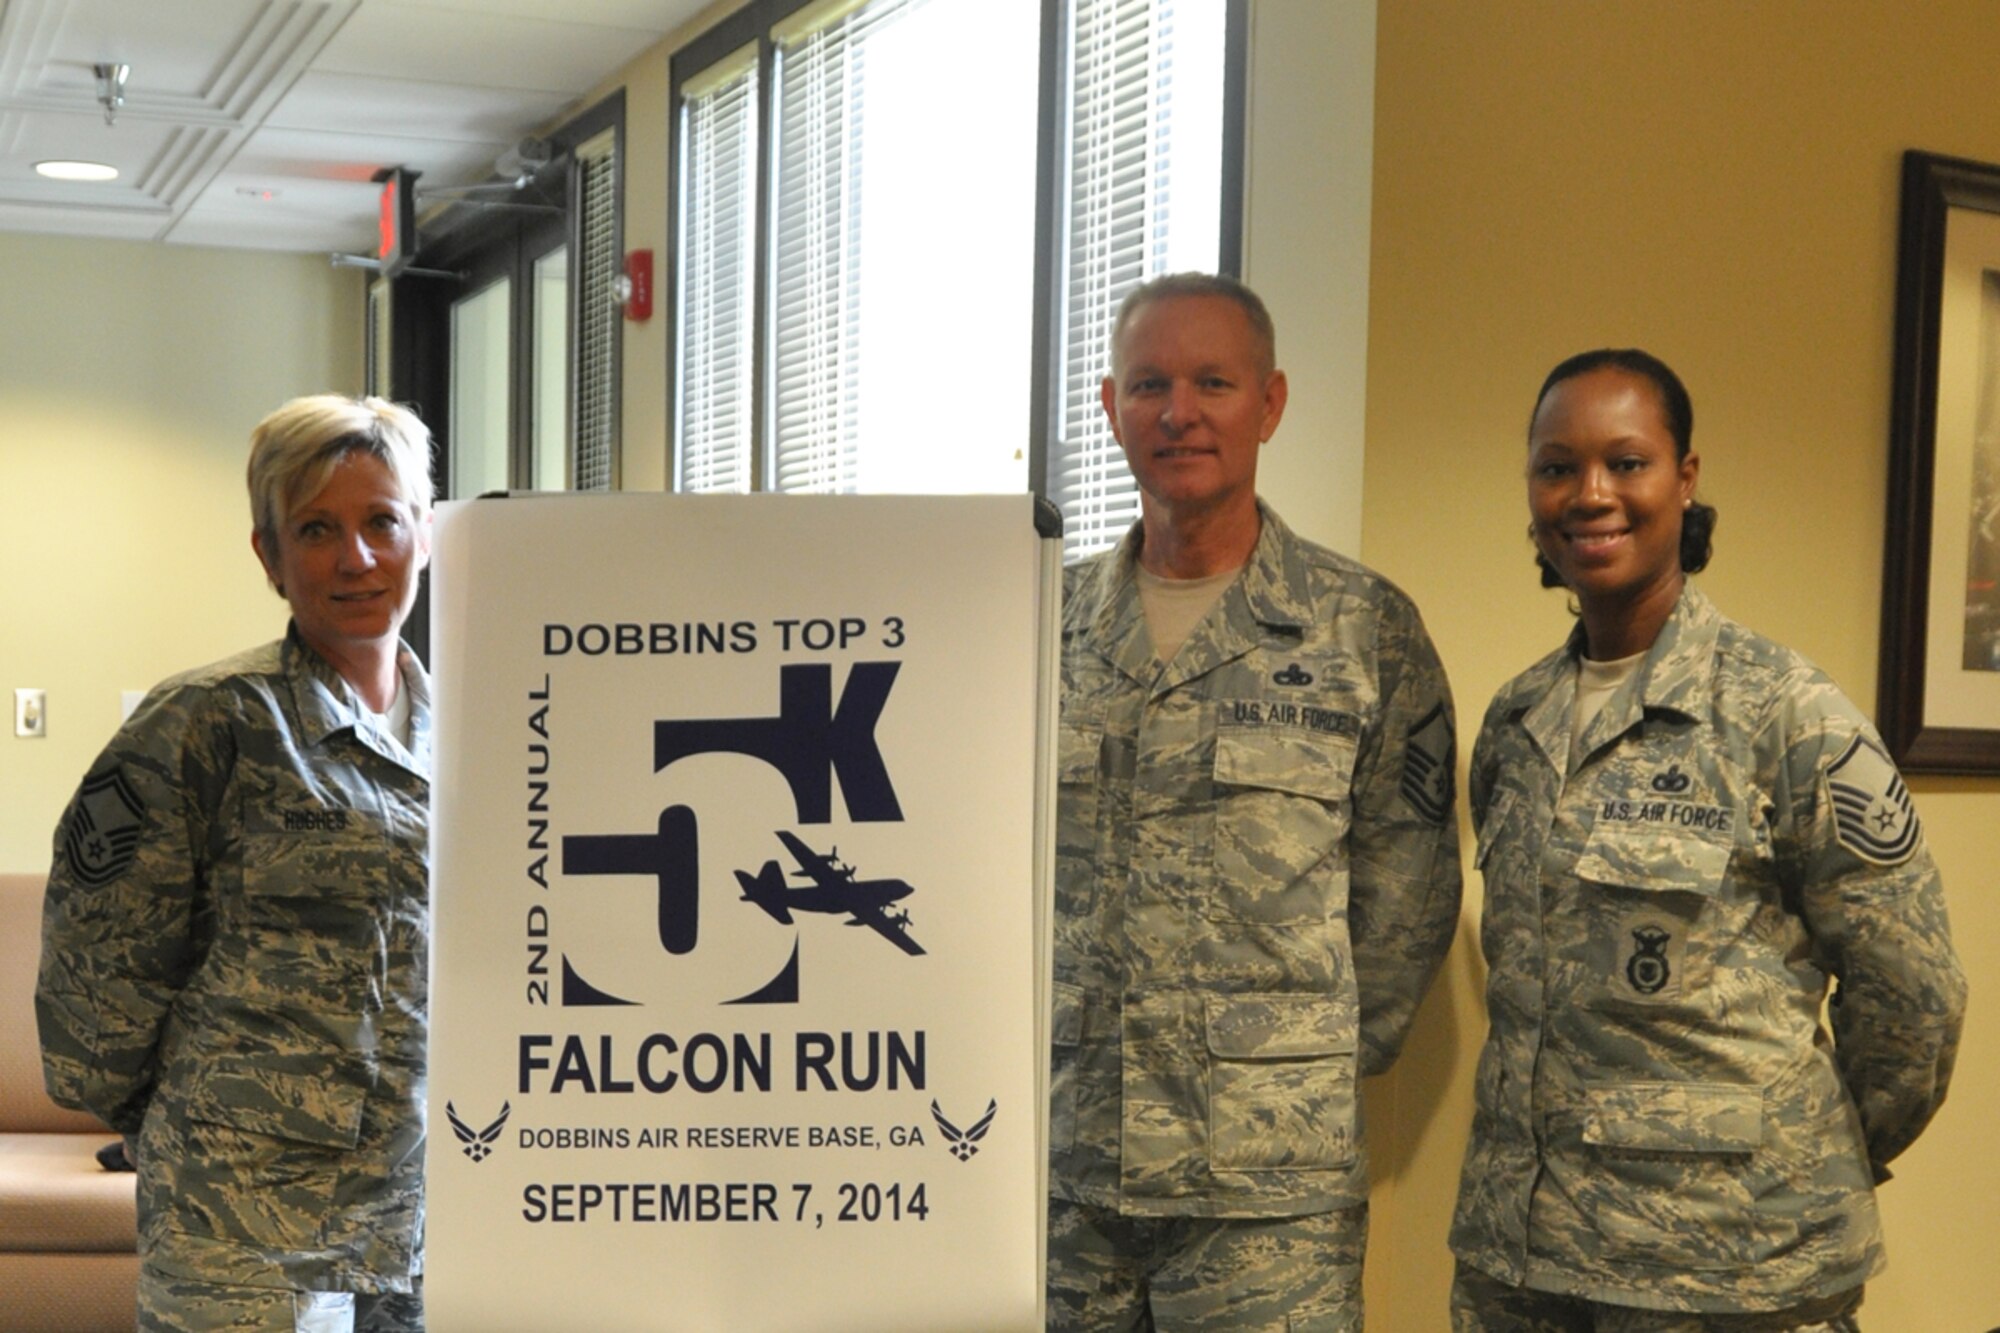 Dobbins Top 3 members Senior Master Sgt. Joy Hughes, Master Sgt. Carl Mayo, and Master Sgt. Engle Coulter register participants for the second annual Falcon 5K at the Dobbins Consolidated Club July 12, 2014. Proceeds from the event go to the Dobbins Emergency Fund used for assisting Airmen in times of need. (U.S. Air Force photo/Master Sgt. James Branch)